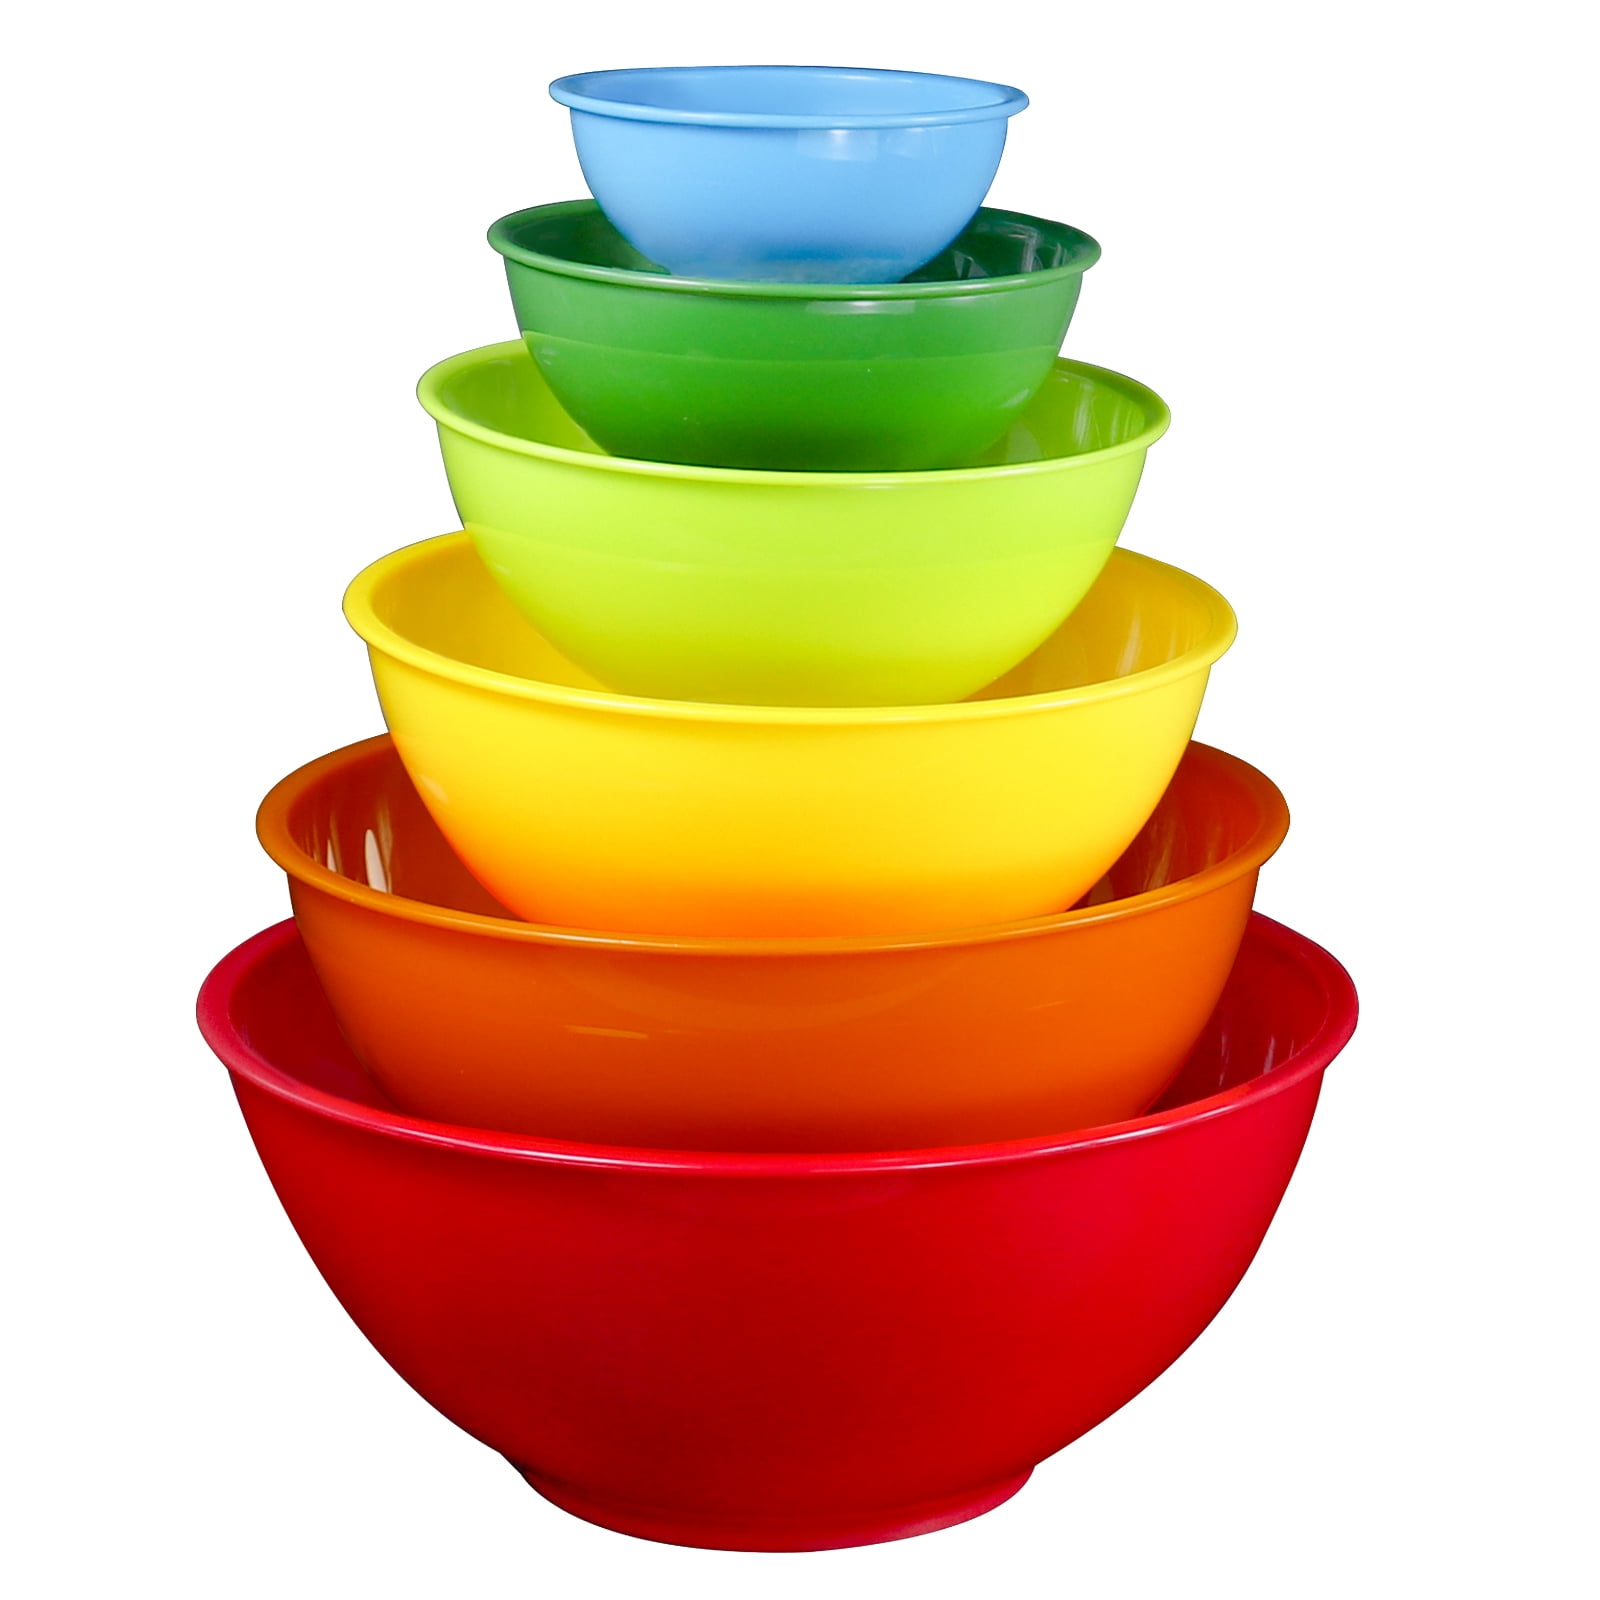 Hokku Designs Plastic Salad And Serving 10-Inch Bowls, Set Of 3, Reusable,  BPA-Free, Made In The USA, Microwave & Dishwasher Safe Dinnerware